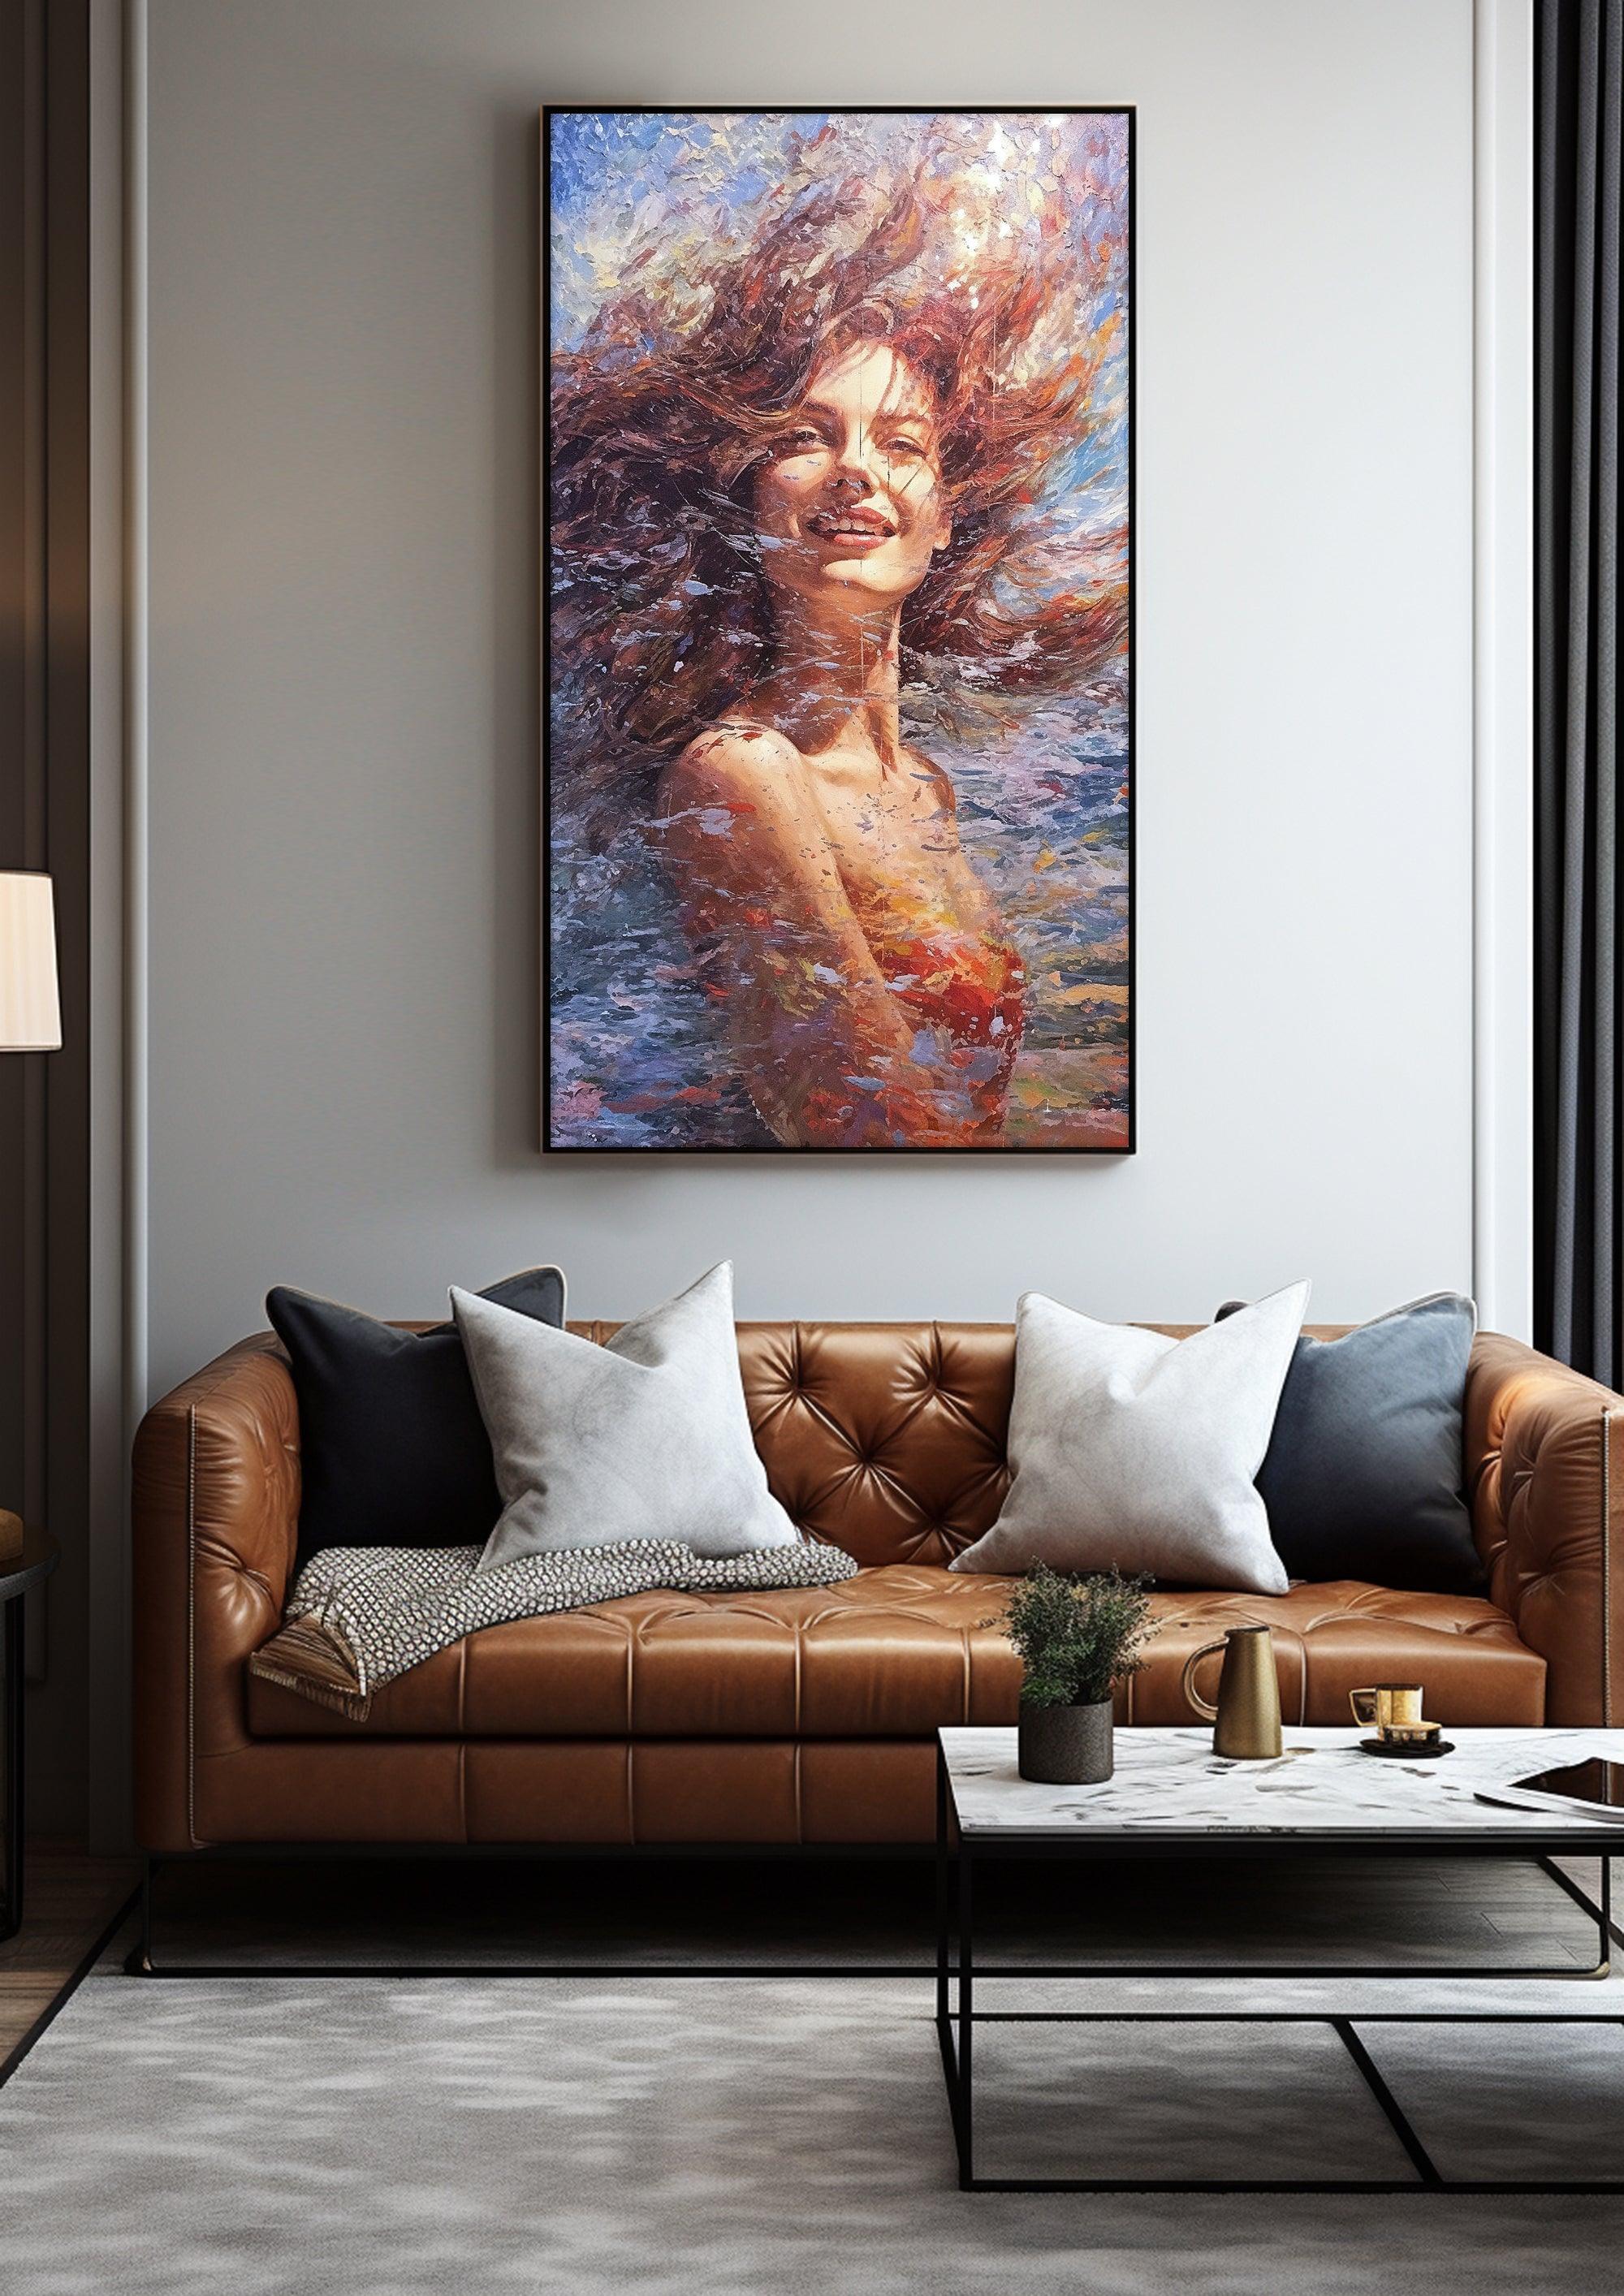 Impressionist Woman - Lively Canvas Art for Sophisticated Interiors，Framed Modern Art Print